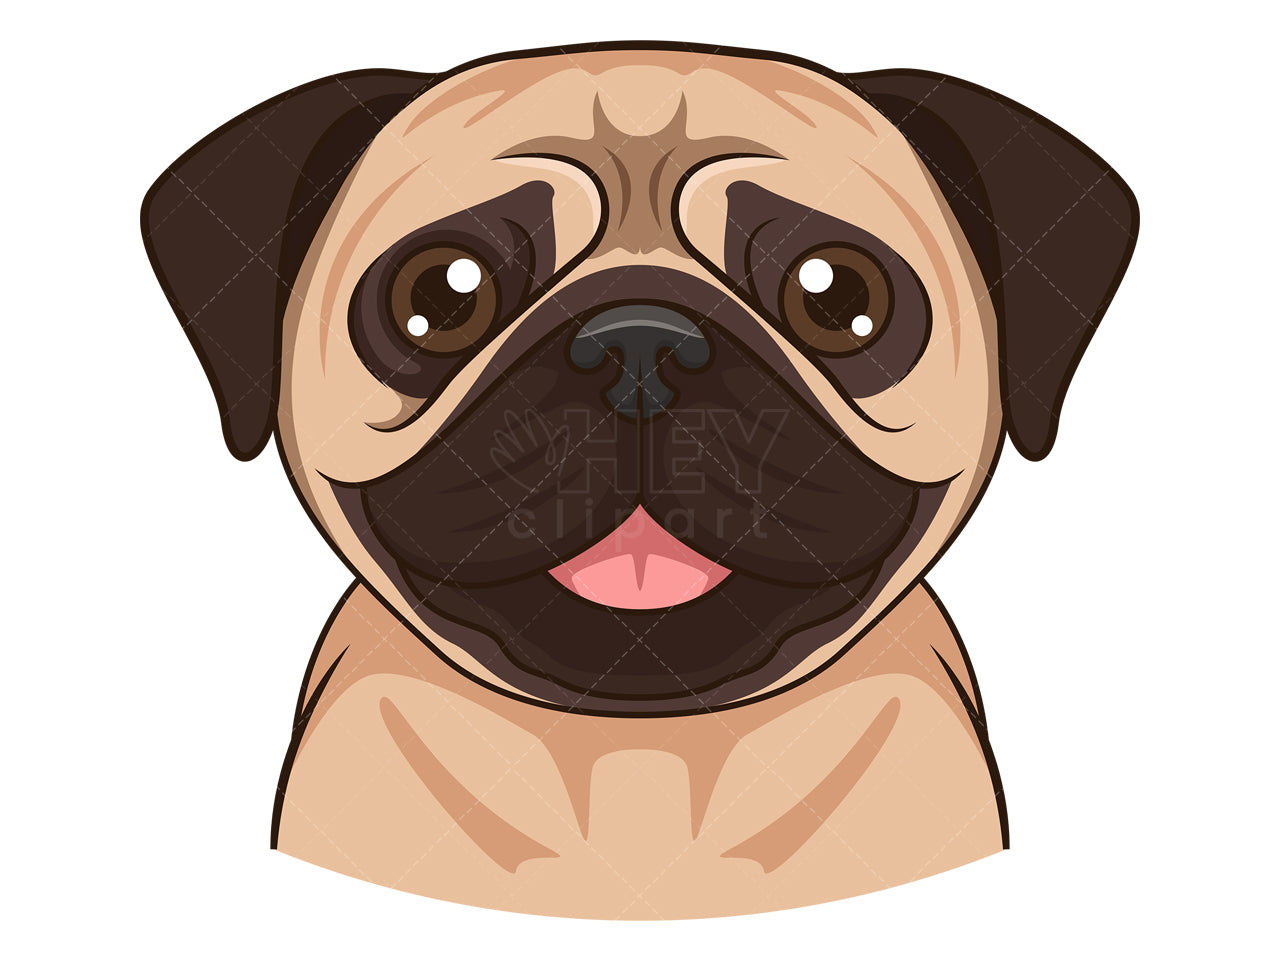 Royalty-free stock vector illustration of a pug face.